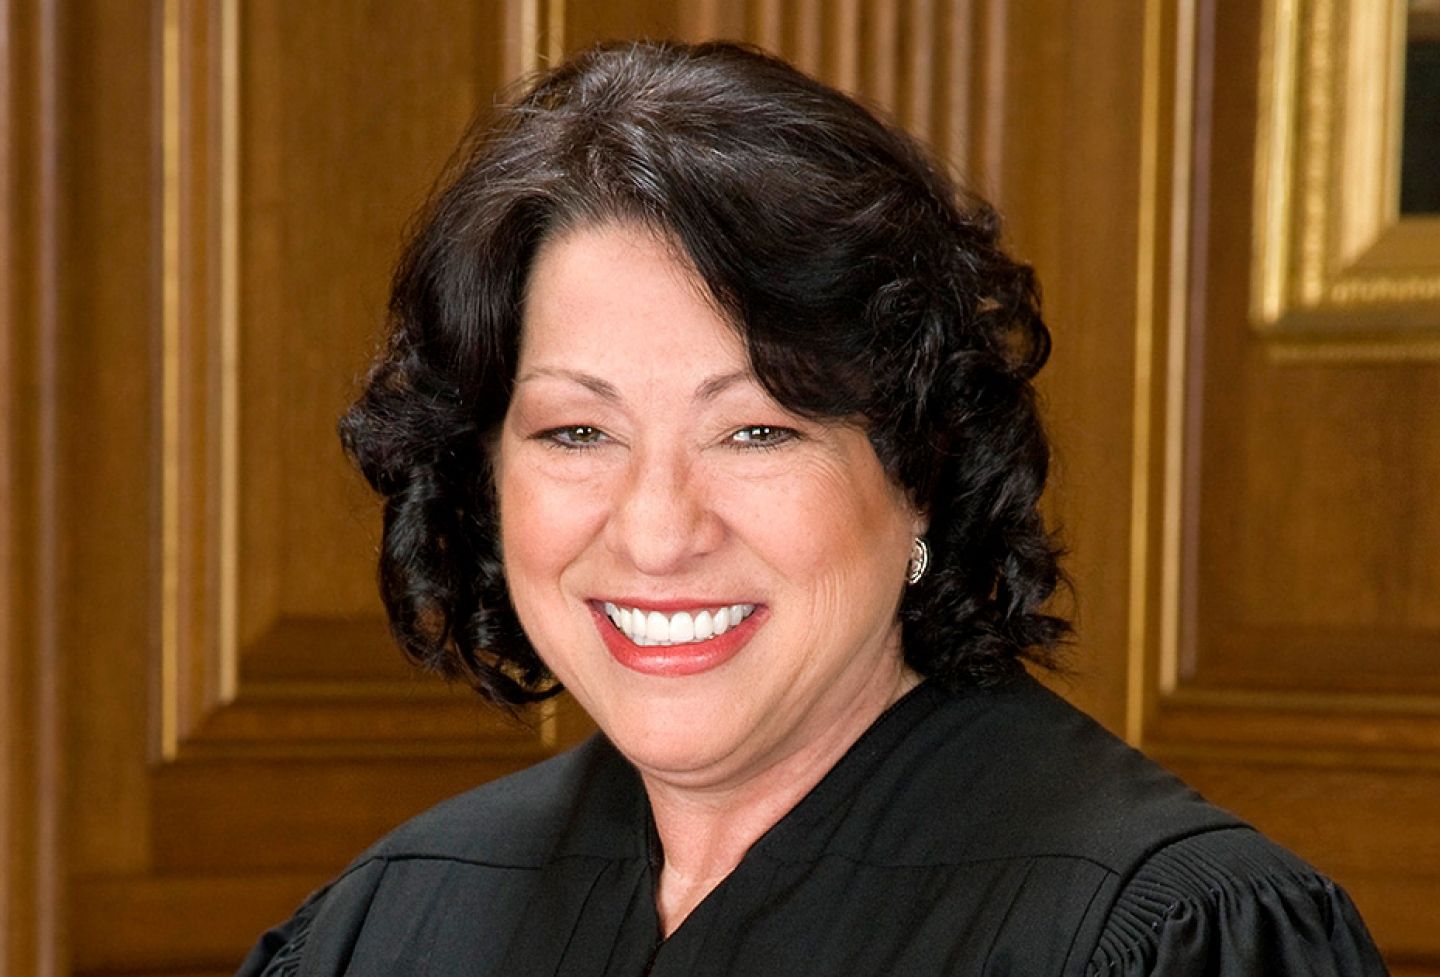 U.S. Supreme Court Justice Sonia Sotomayor was named the 2020 recipient of the Thomas Jefferson Foundation Medal in Law in April.